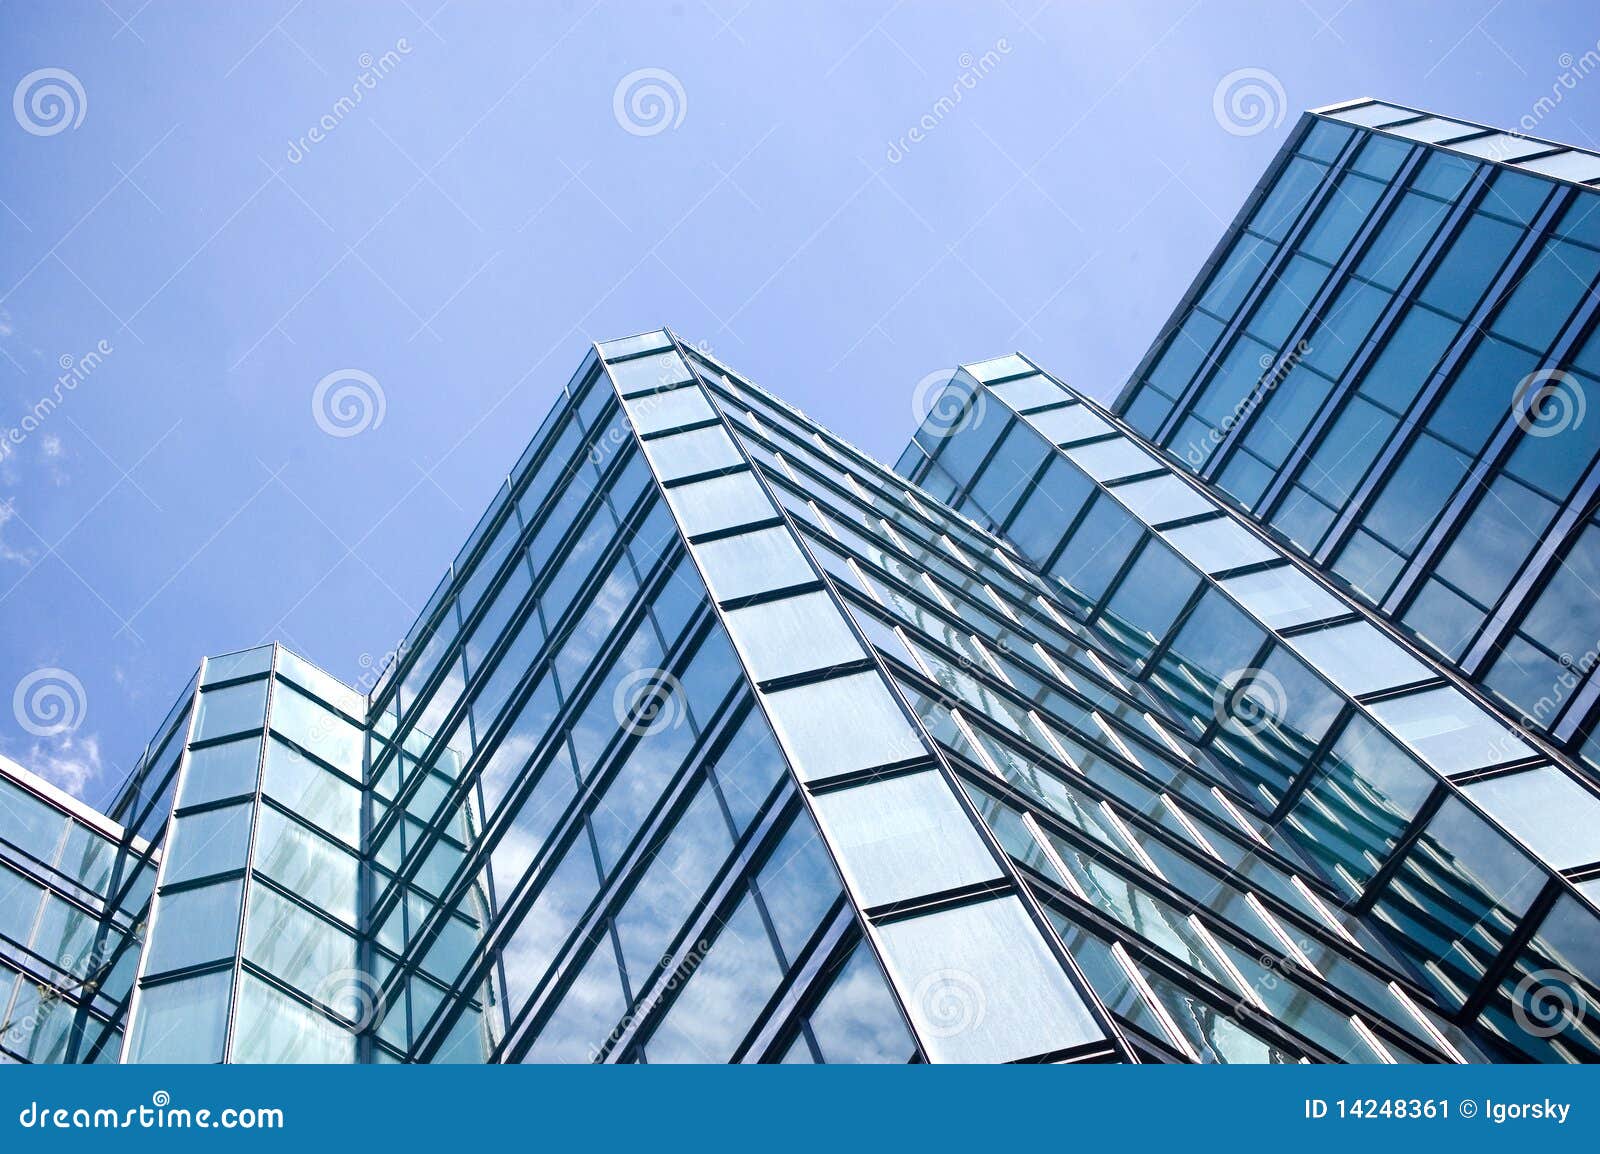 angled glass office building